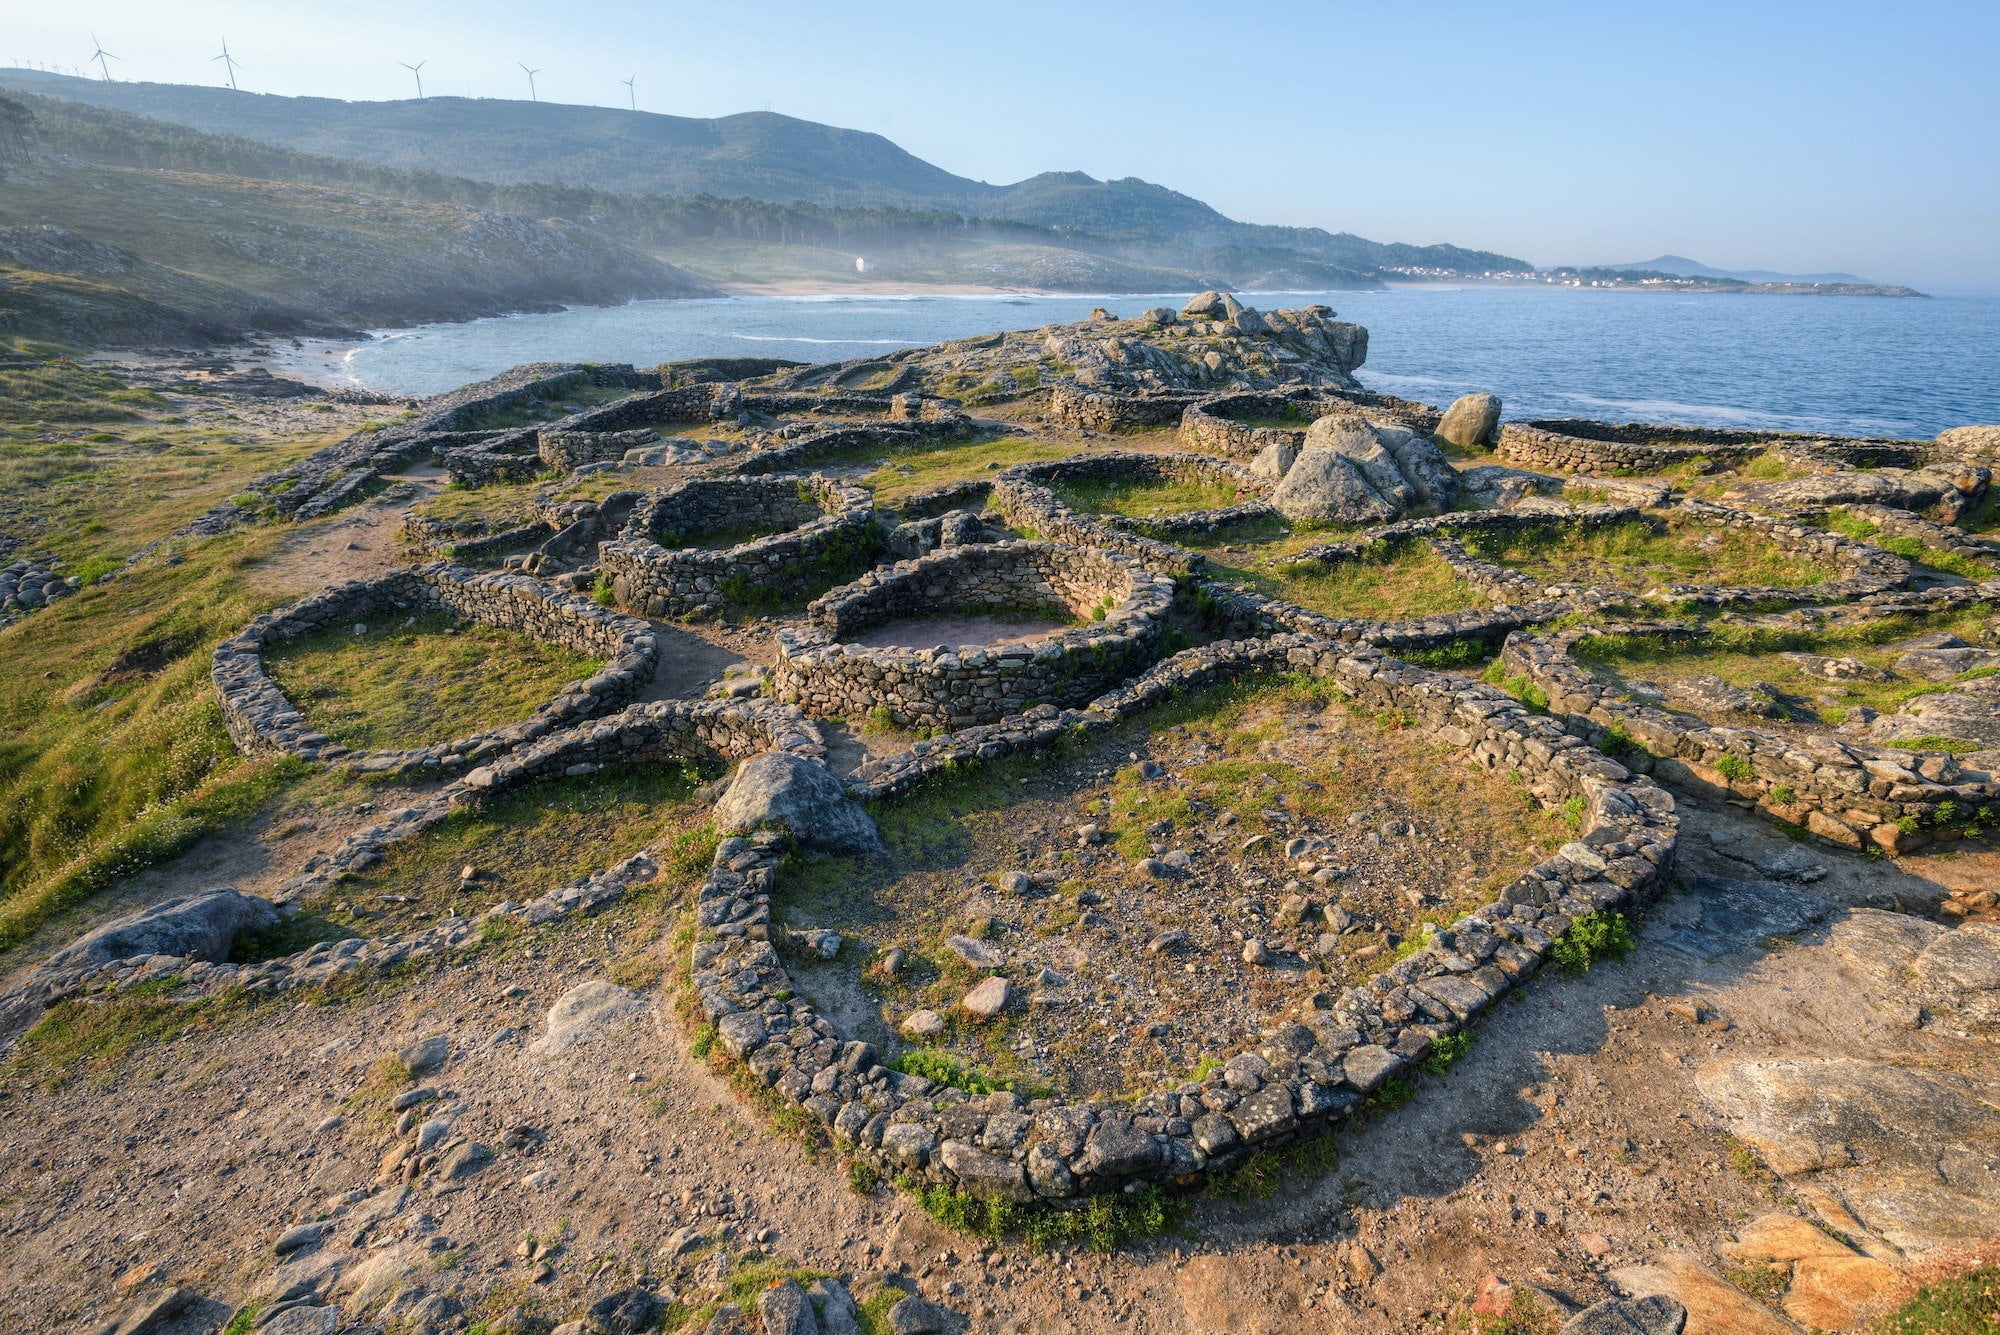 Circular structures in the Celtic settlement of Barona